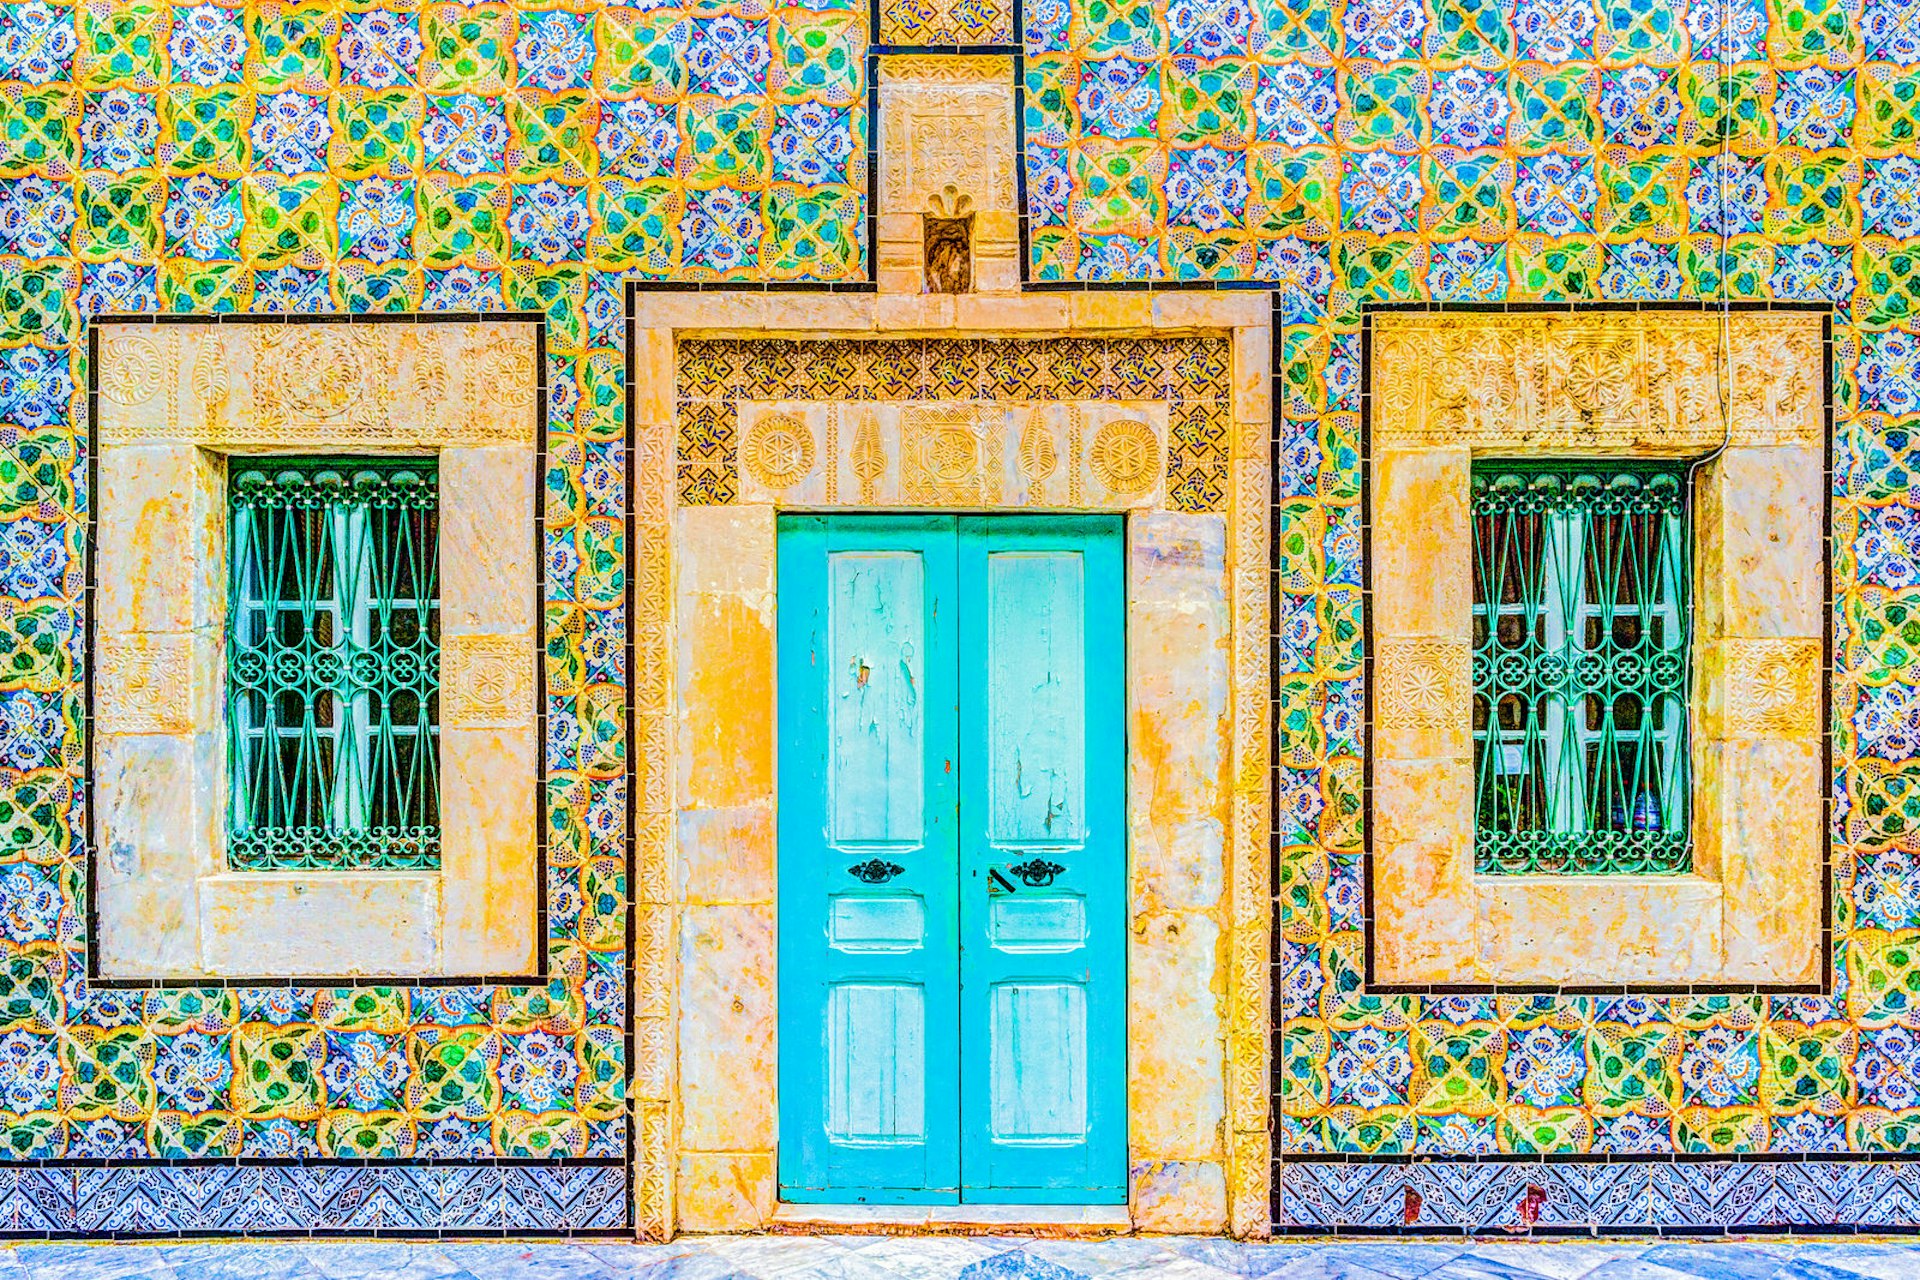 Traditional old painted door in a historical district or medina, Tunisia © Romas_Photo / Shutterstock